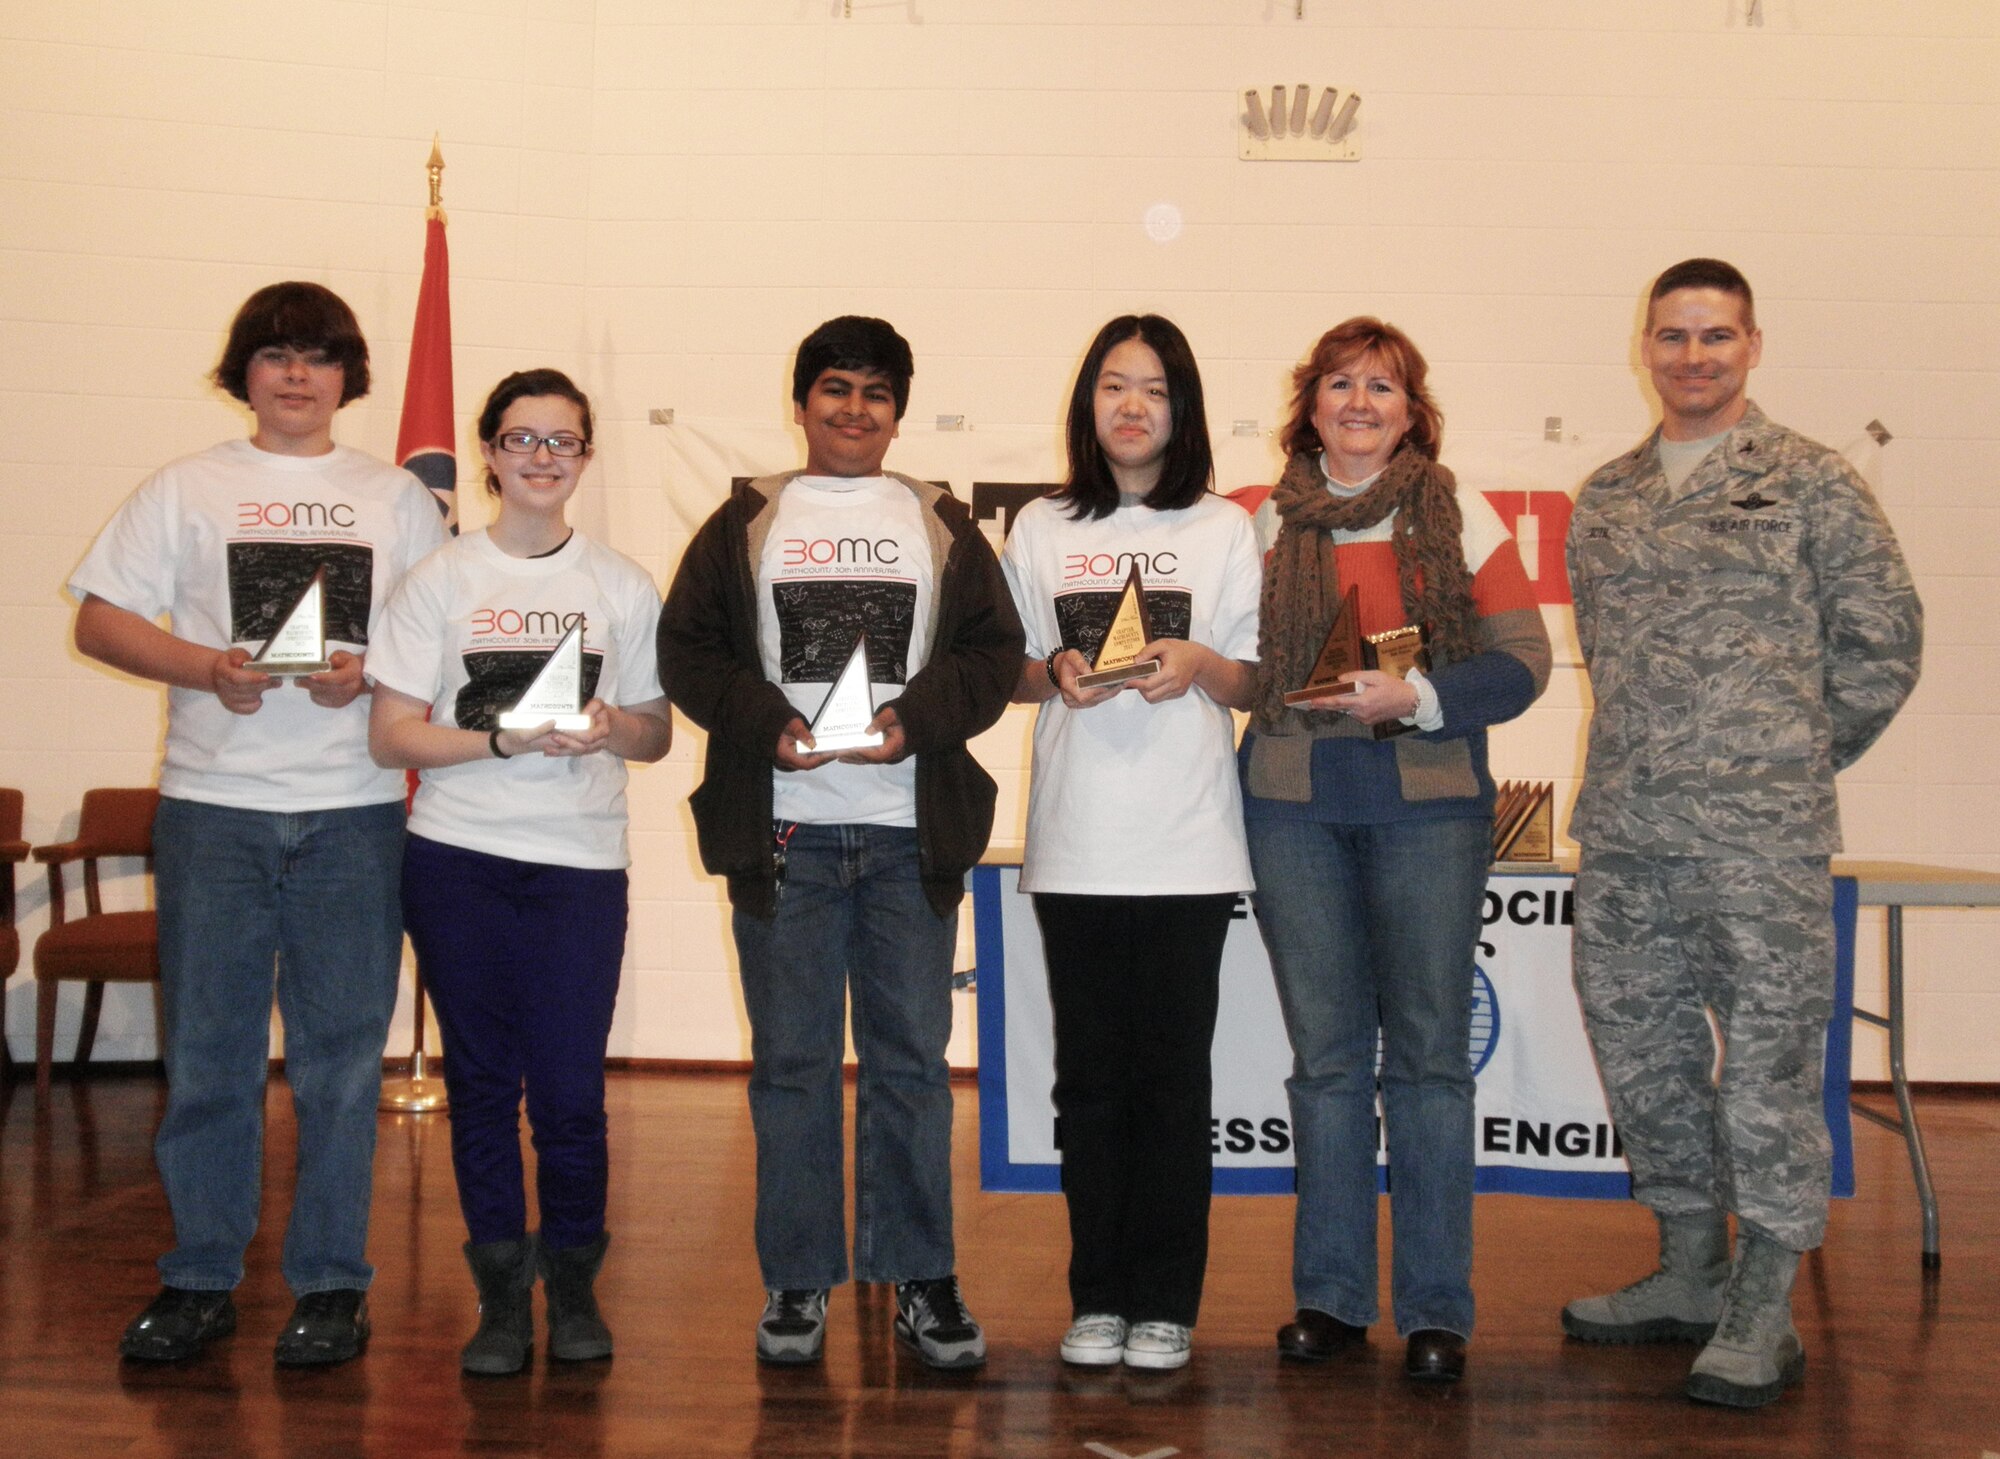 From left to right, Keaton Pendergrast, Madie McAndrew, Yash Mansharman, Corrina Zhang and Lea Anne Windham, coach and math department chair from Wartrace, Tenn., pose with AEDC Commander Col. Raymond Toth after the Webb School team from Bell Buckle earned second place in the local 2013 MathCounts competition held Feb. 16 at the University of Tennessee Space Institute. (Photo provided)